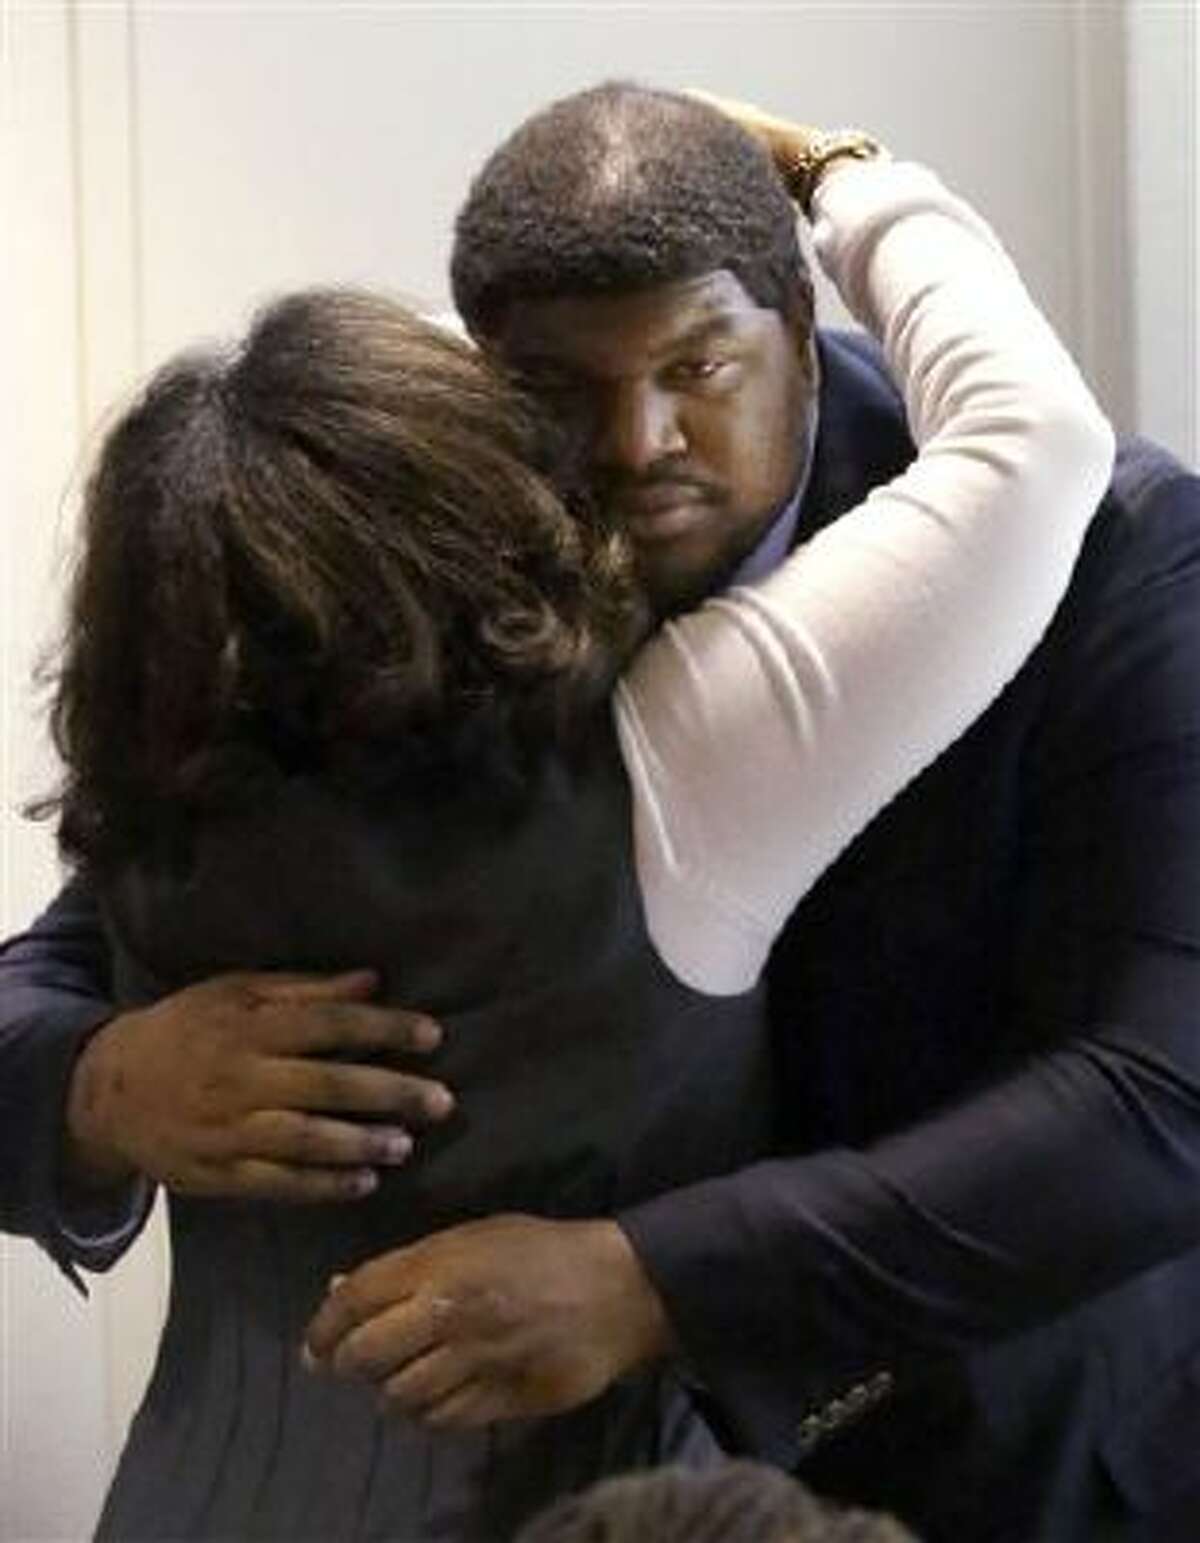 Former Dallas Cowboys NFL football player Josh Brent gets a hug from family after closing arguments in his intoxication manslaughter trial Tuesday, Jan. 21, 2014, in Dallas. The jury has begun deliberating in Brent's intoxication manslaughter trial after lawyers wrapped up their closing arguments Tuesday morning. Prosecutors accuse the former defensive tackle of drunkenly crashing his Mercedes near Dallas during a night out in December 2012, killing his good friend and teammate, Jerry Brown.